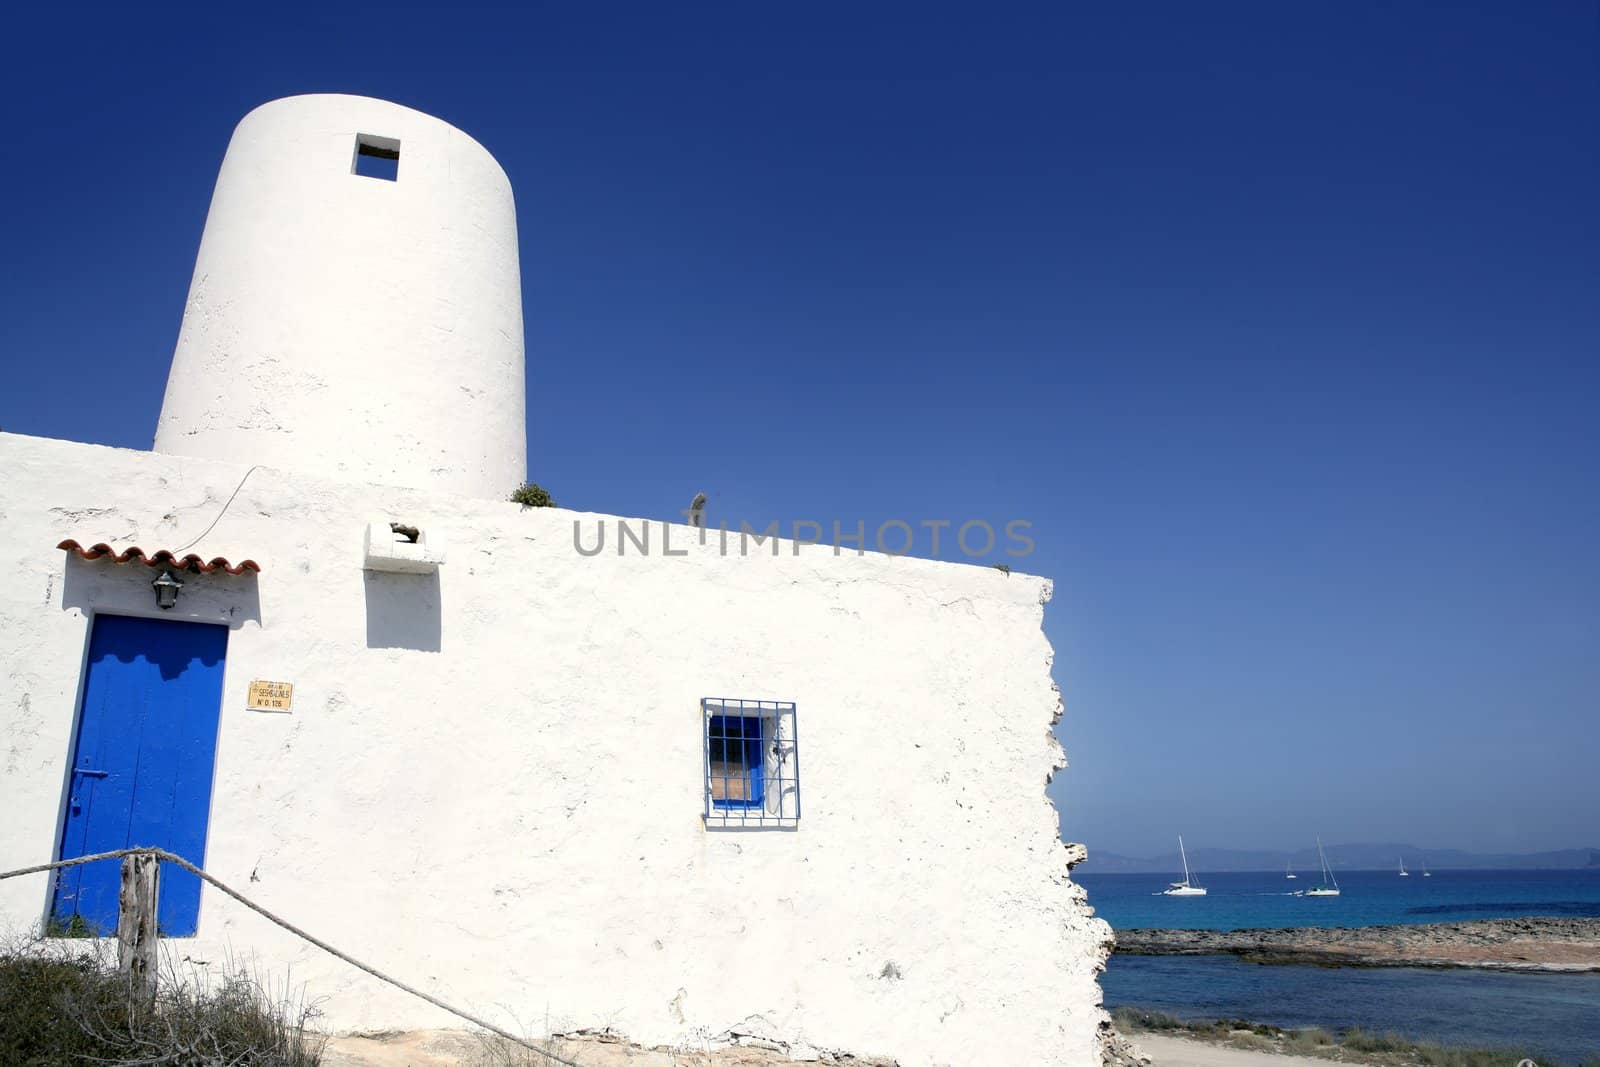 Balearic islands architecture white mill in Formentera over blue sky